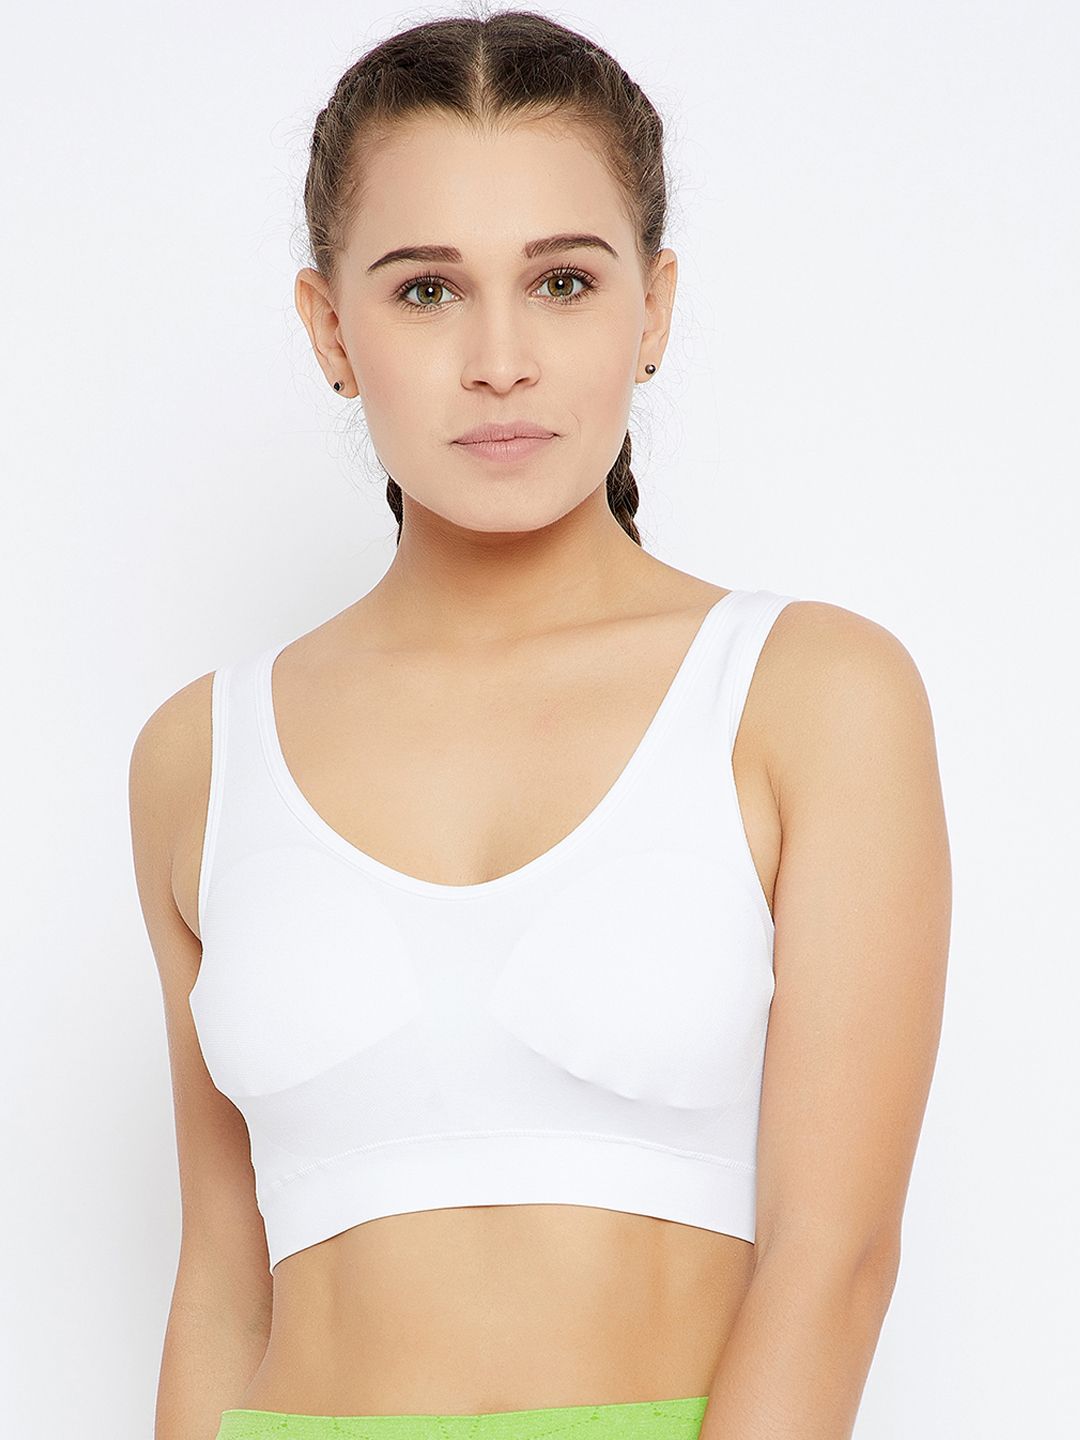 C9 AIRWEAR White Solid Non-Wired Non Padded Sports Bra PZ2135_White Price in India